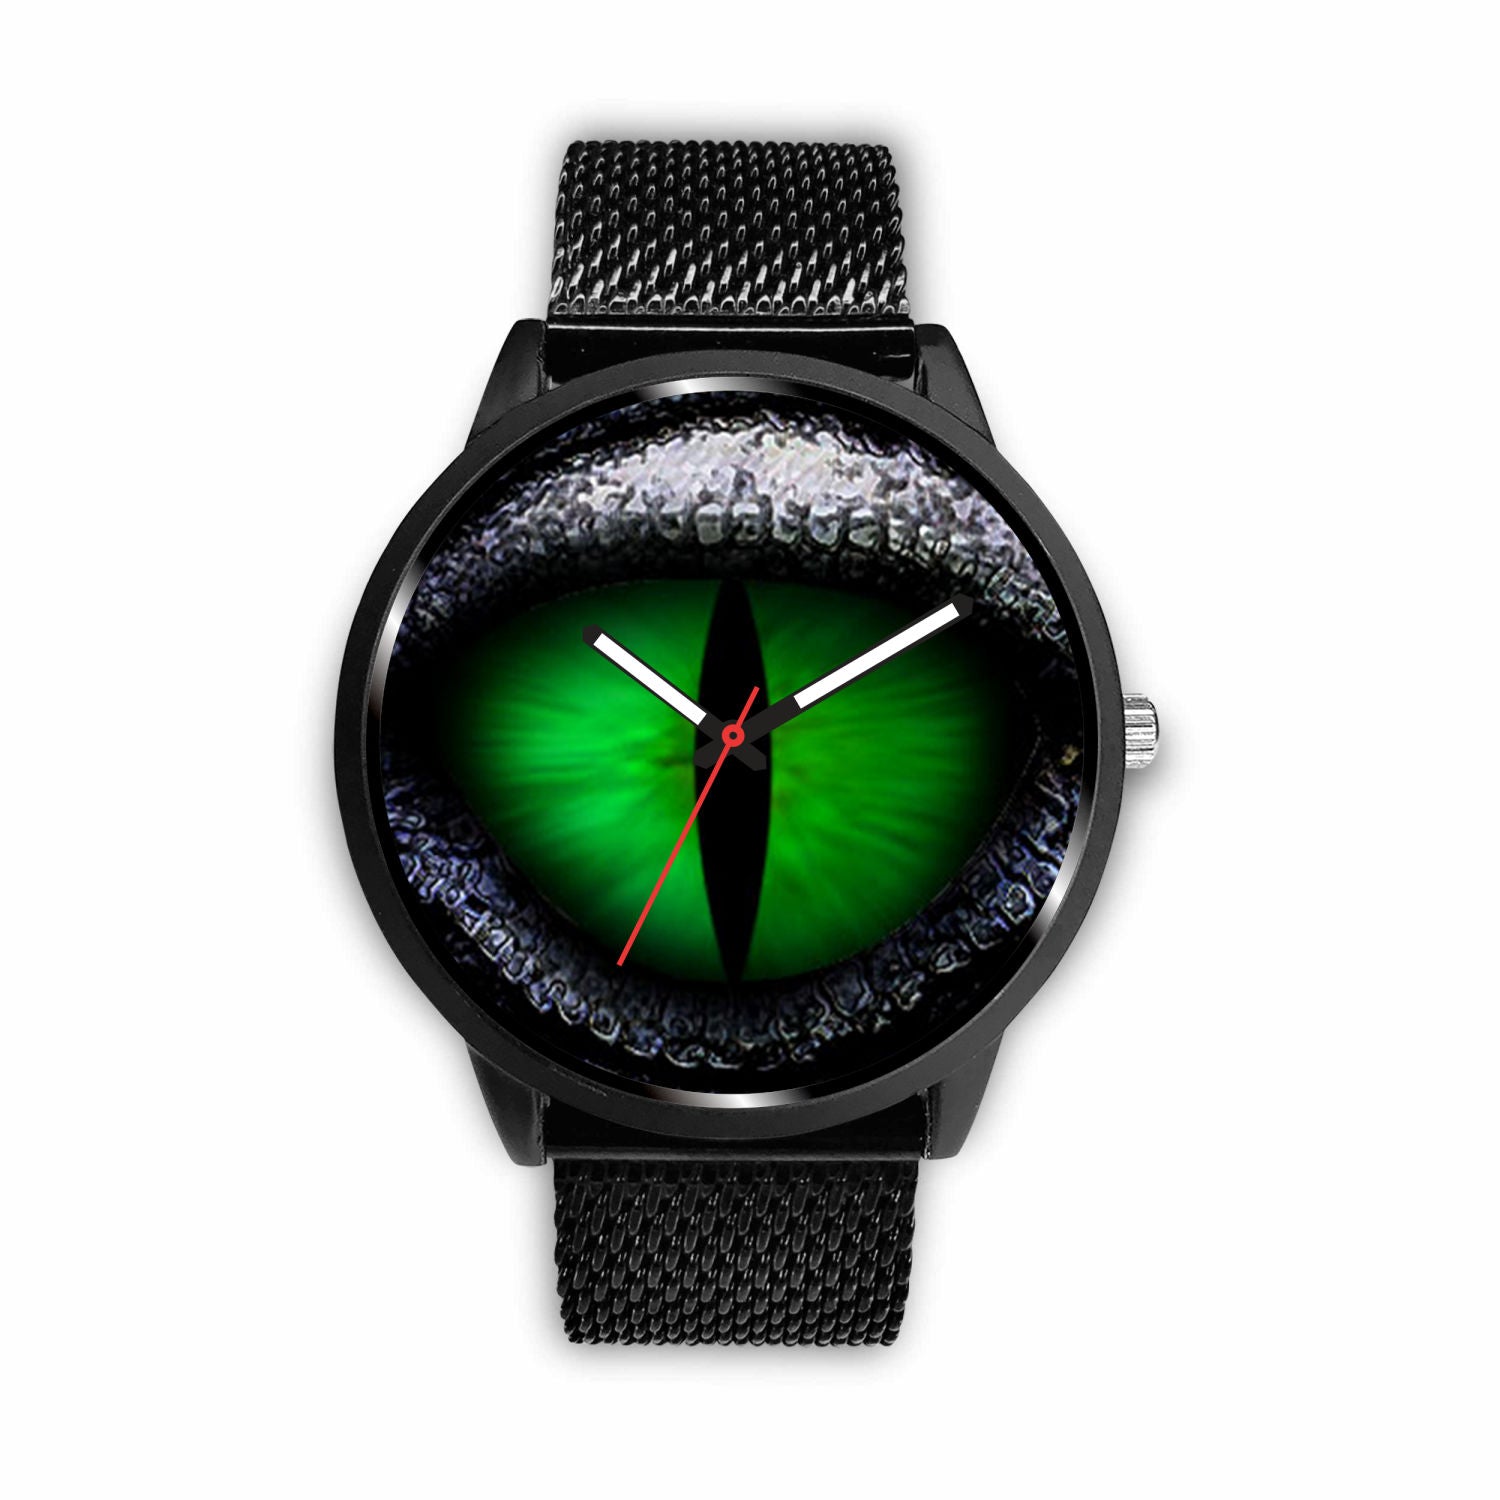 Limited Edition Vintage Inspired Custom Watch Eyes 16.7